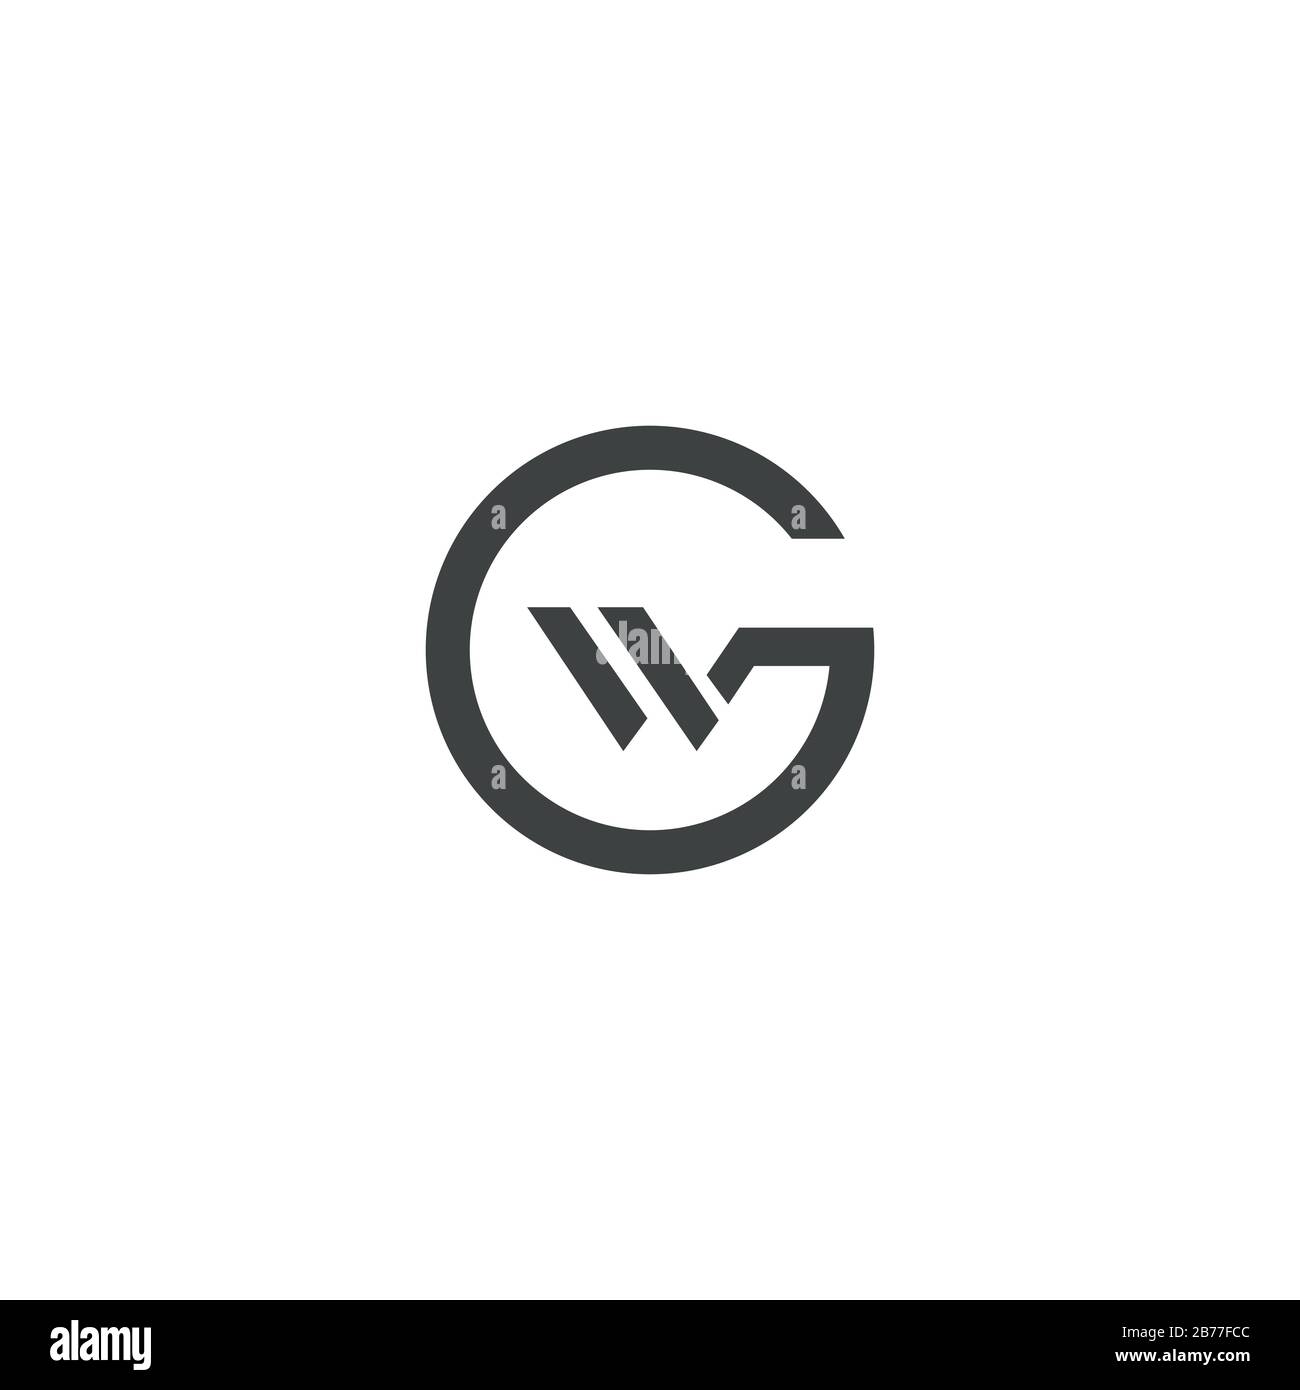 Initial letter wg or gw logo design template Stock Vector